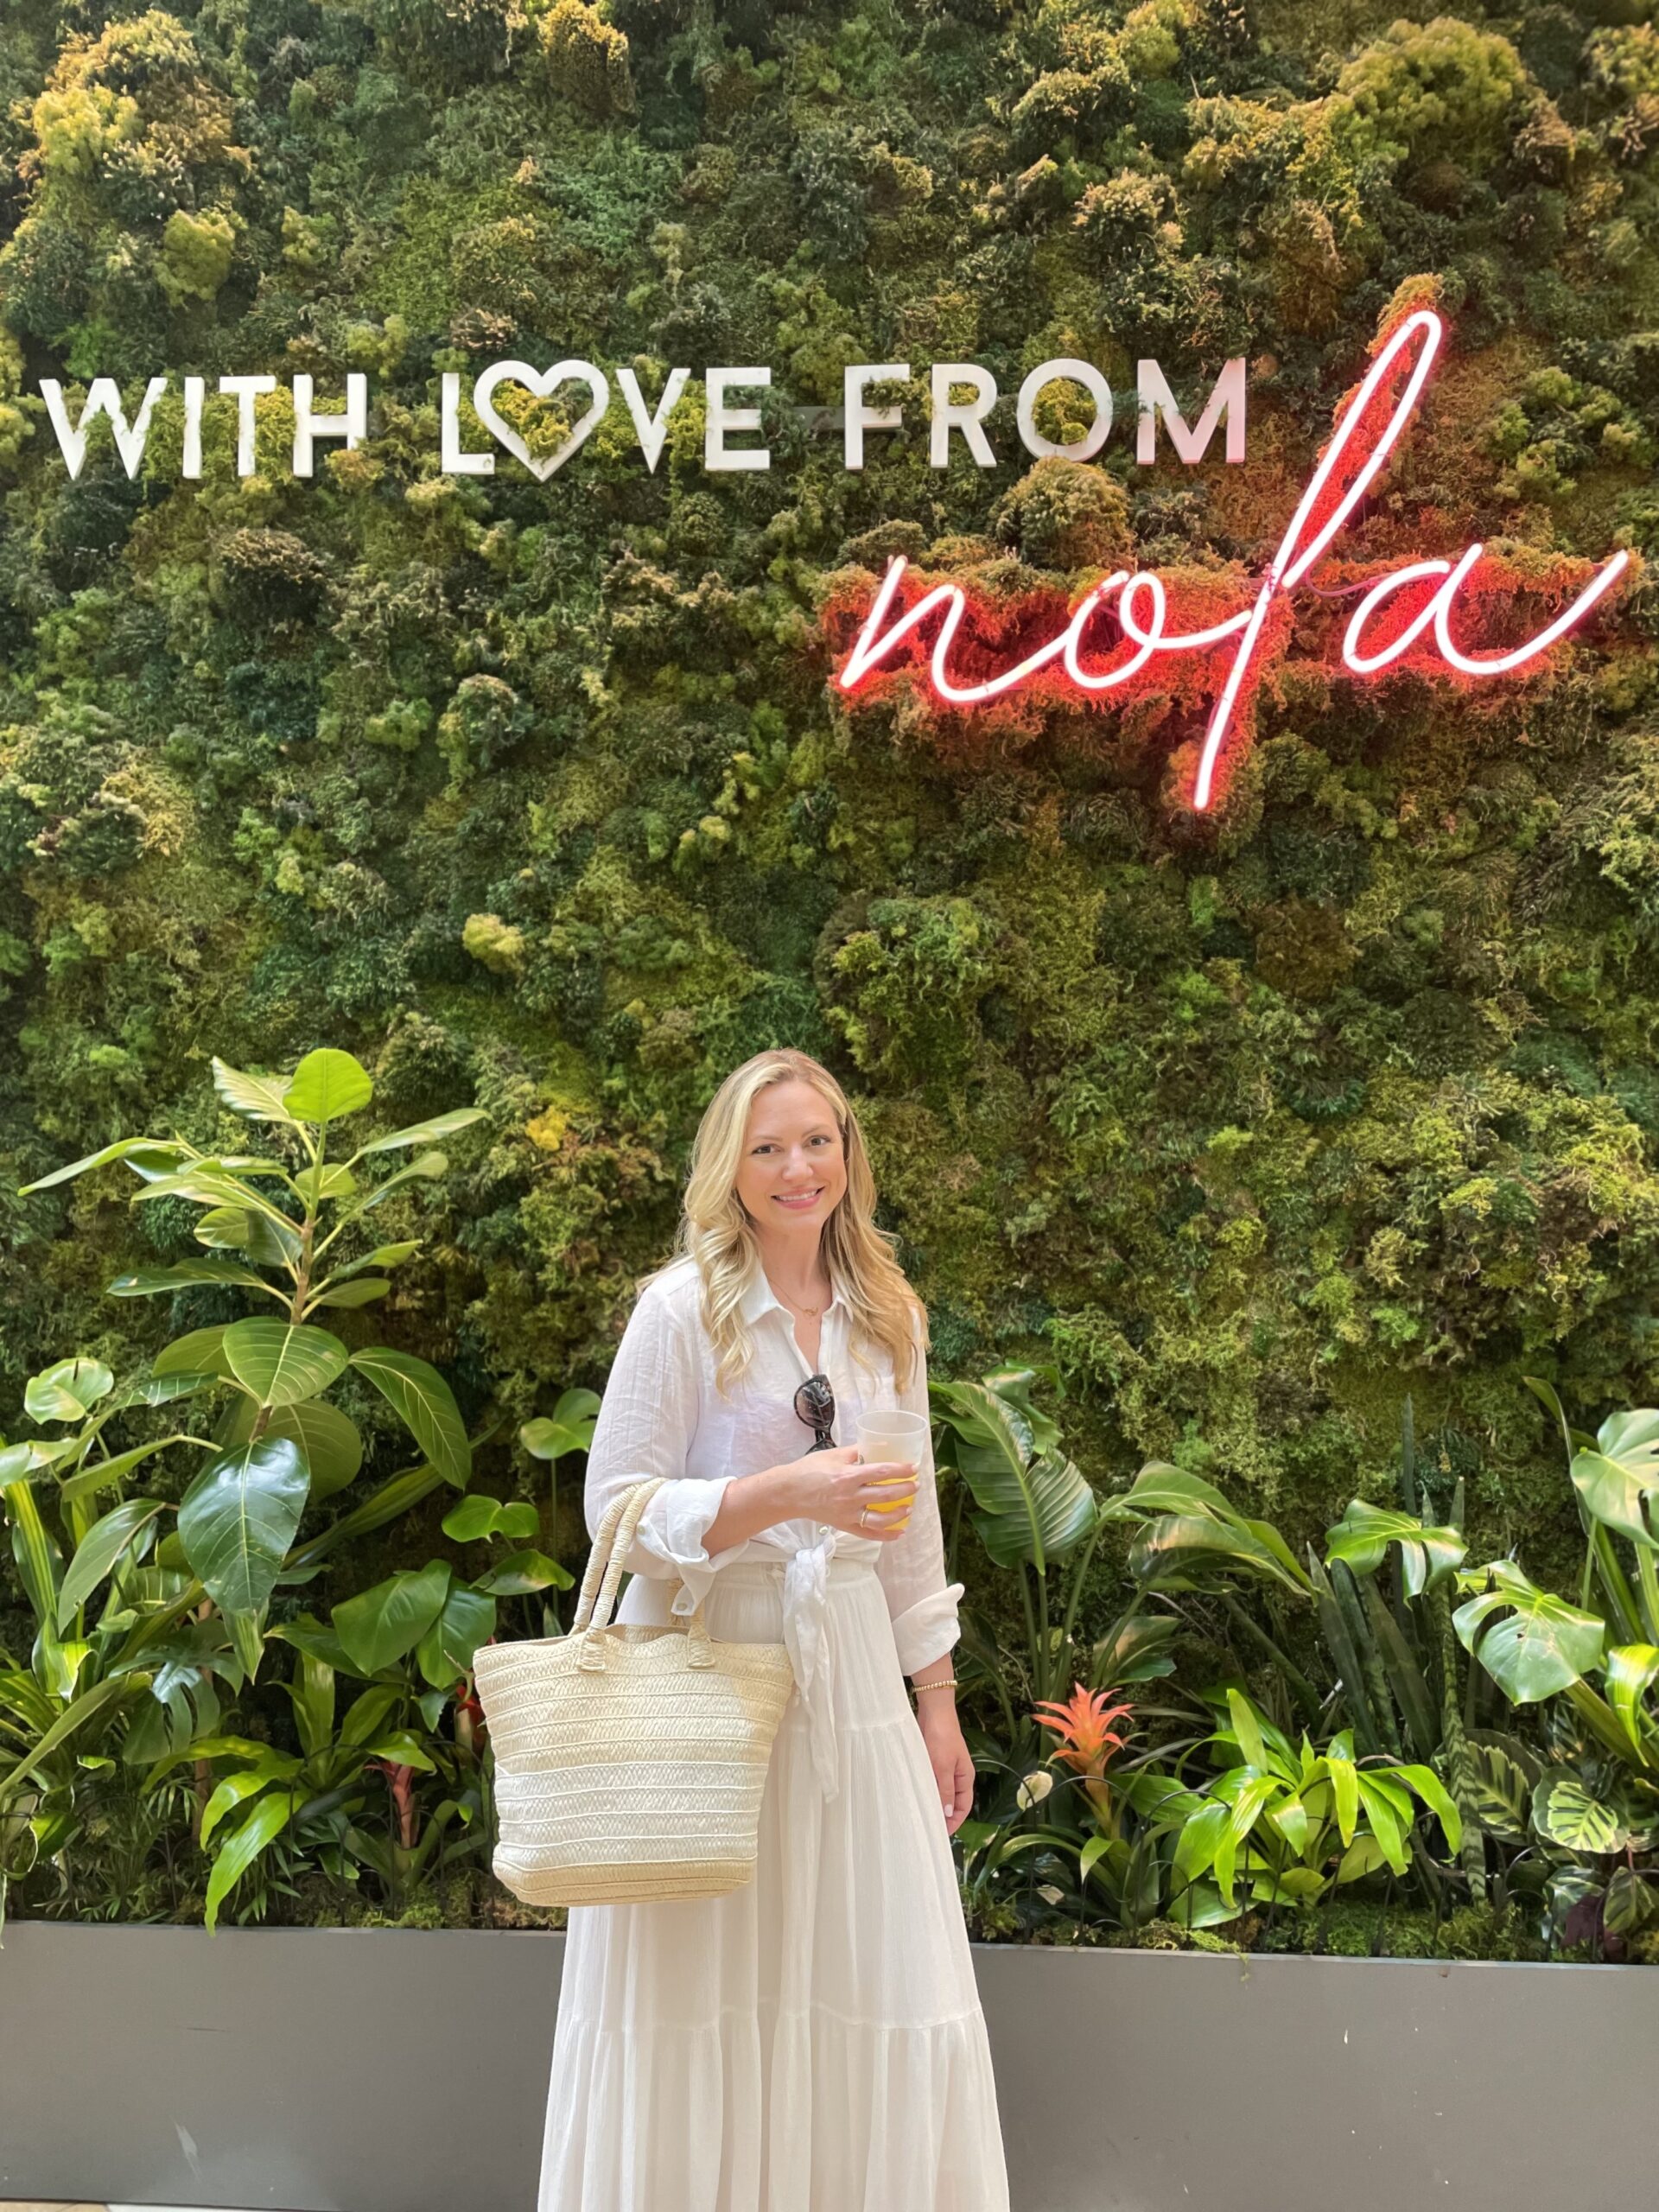 Girl in white outfit standing in front of green wall that says with love from nola